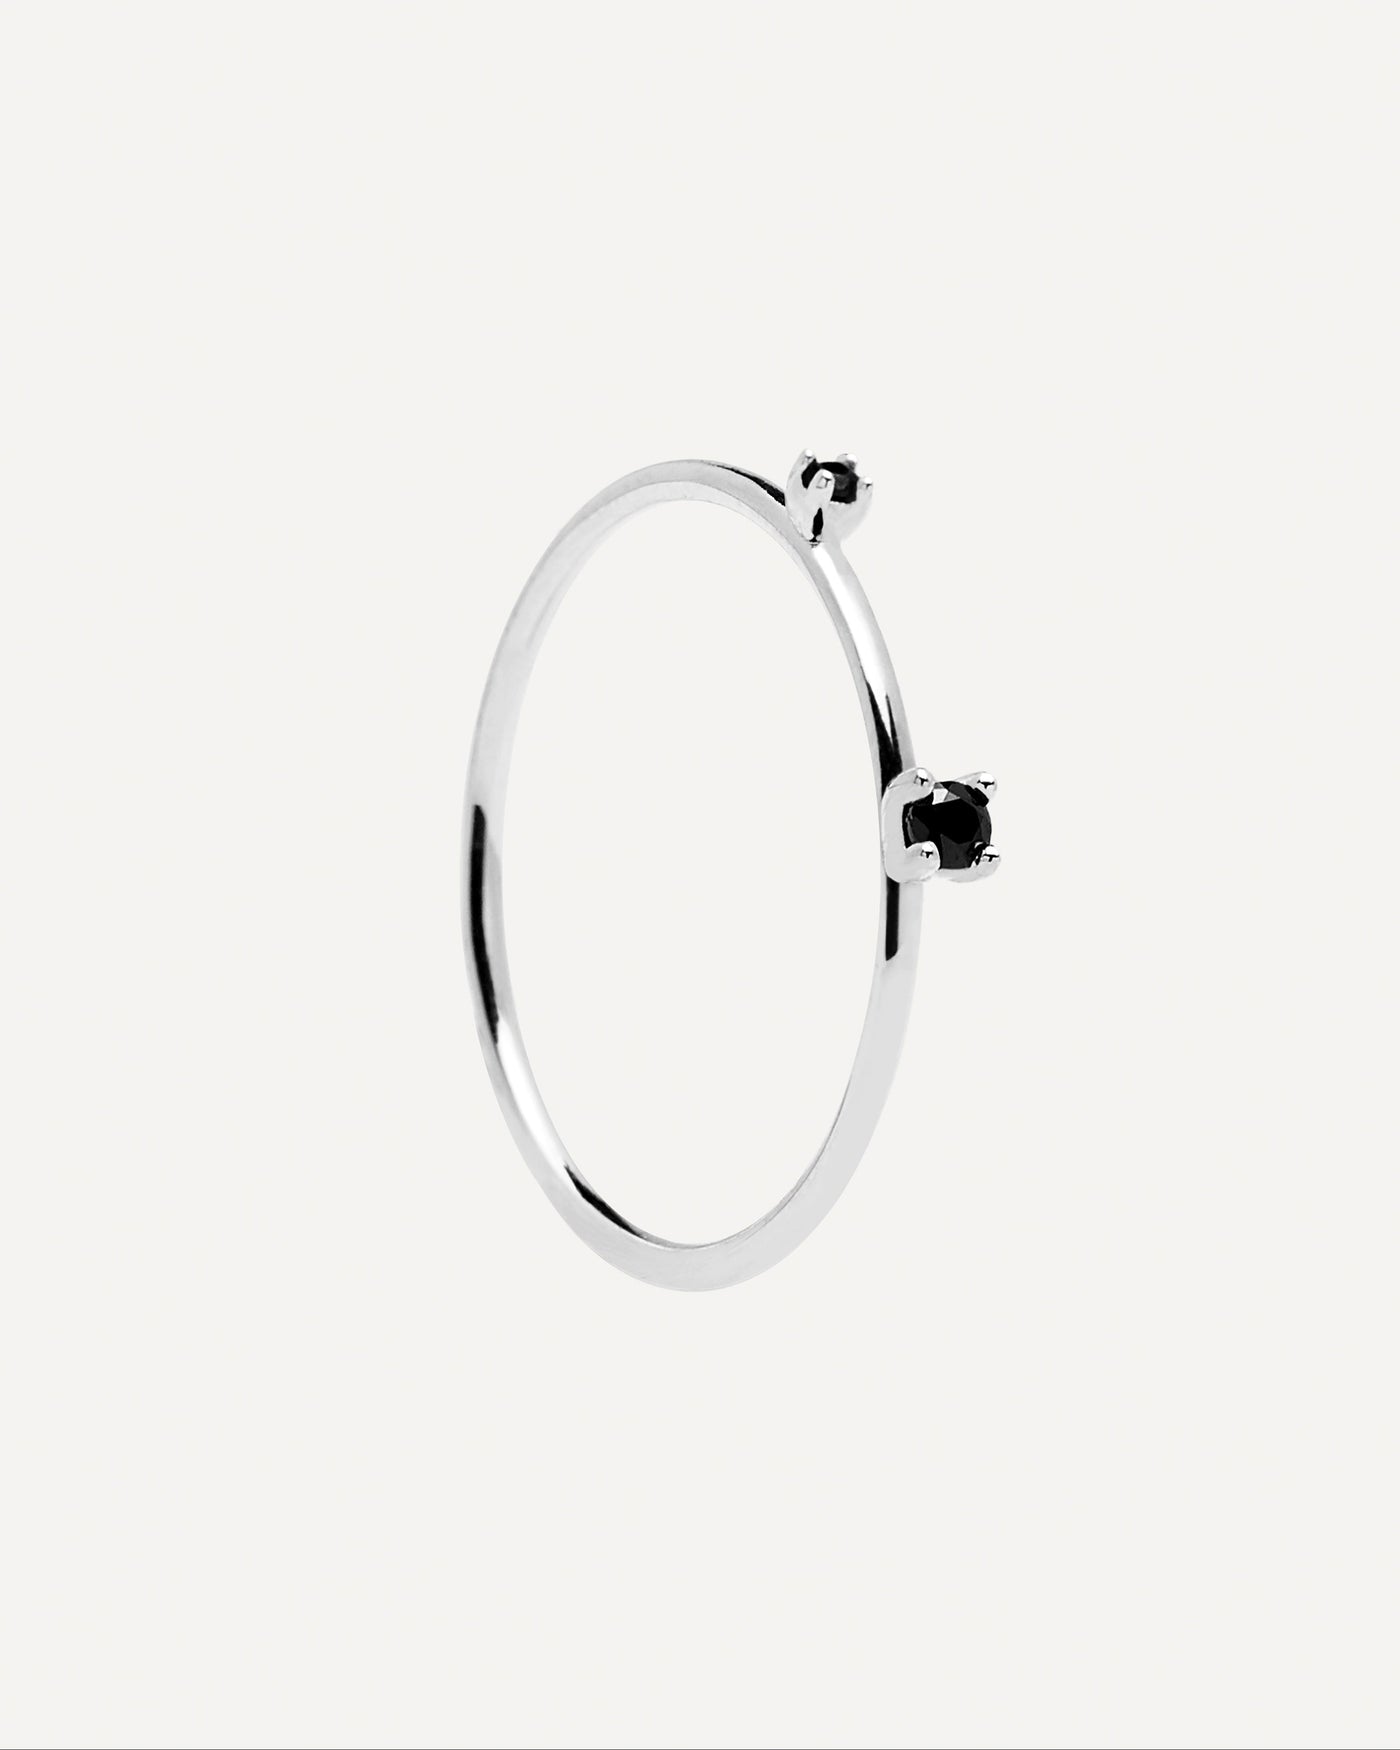 2024 Selection | Black Kita Silver Ring. Get the latest arrival from PDPAOLA. Place your order safely and get this Best Seller. Free Shipping over 40€